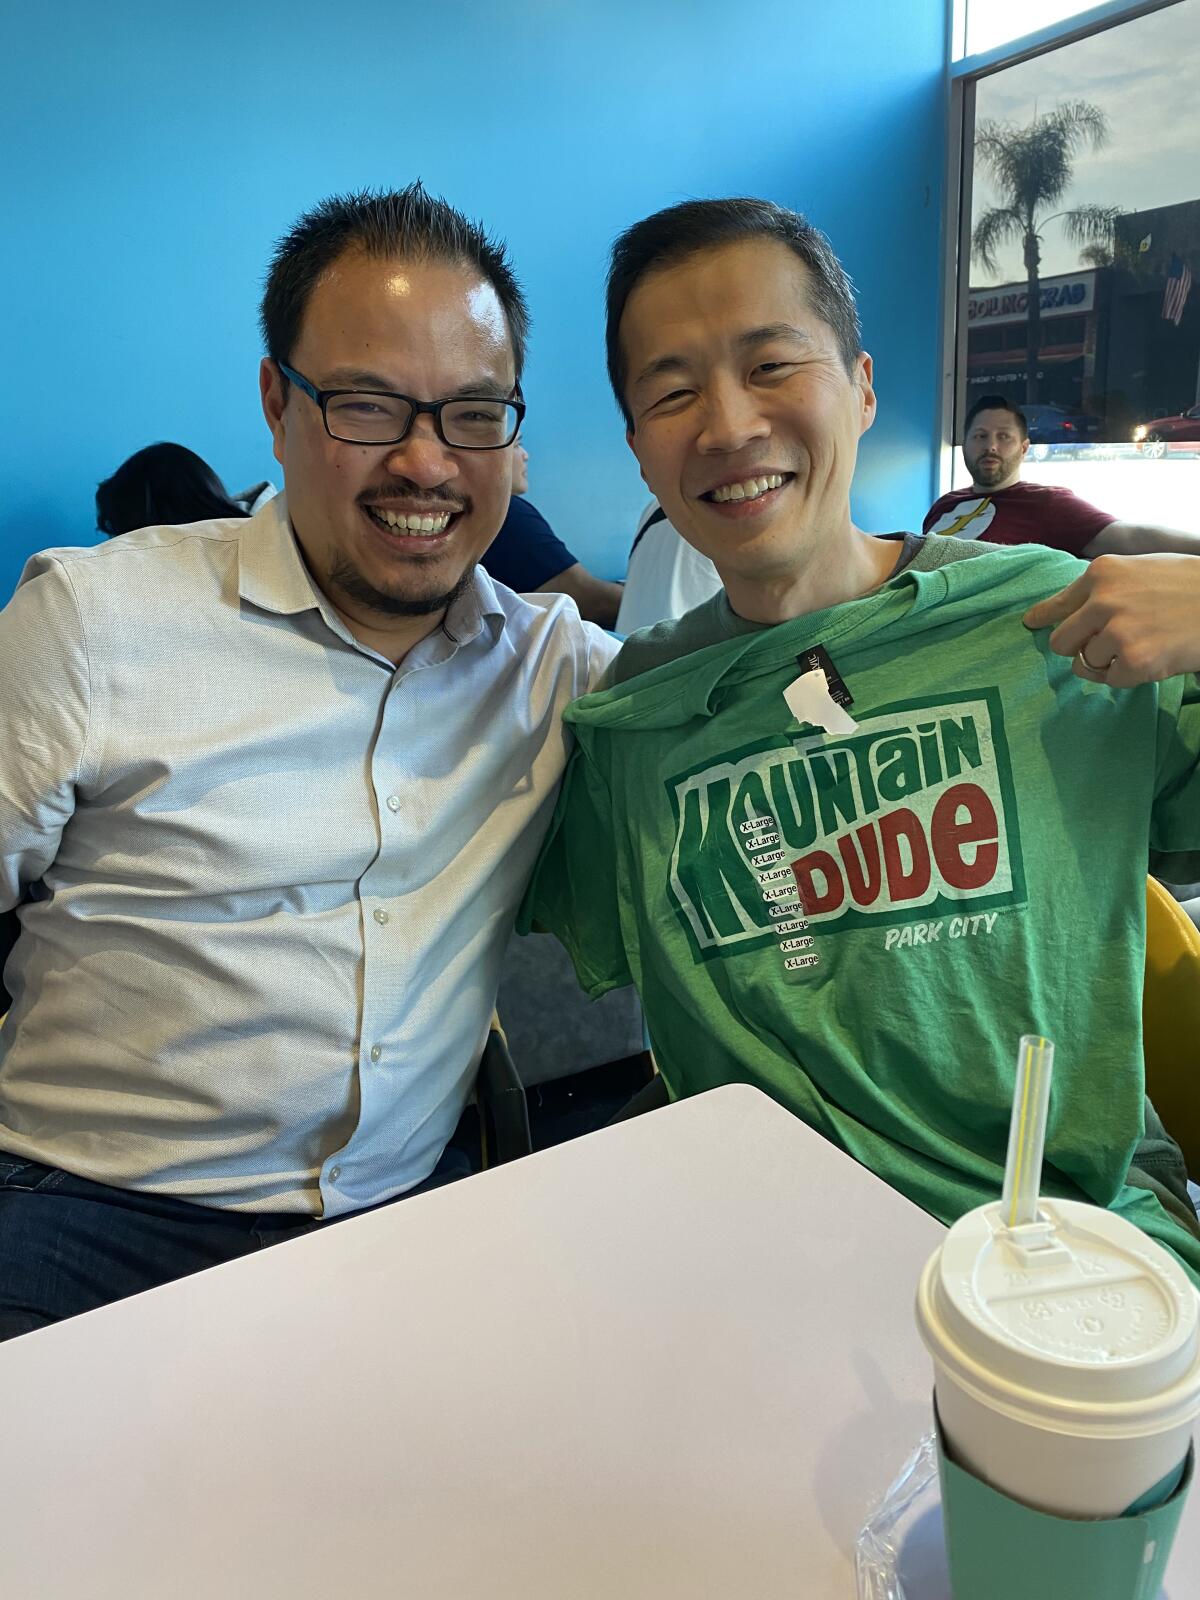 L.A. Times critic Justin Chang and Lee Isaac Chung at a table. Chung holds up a Mountain Dude T-shirt.